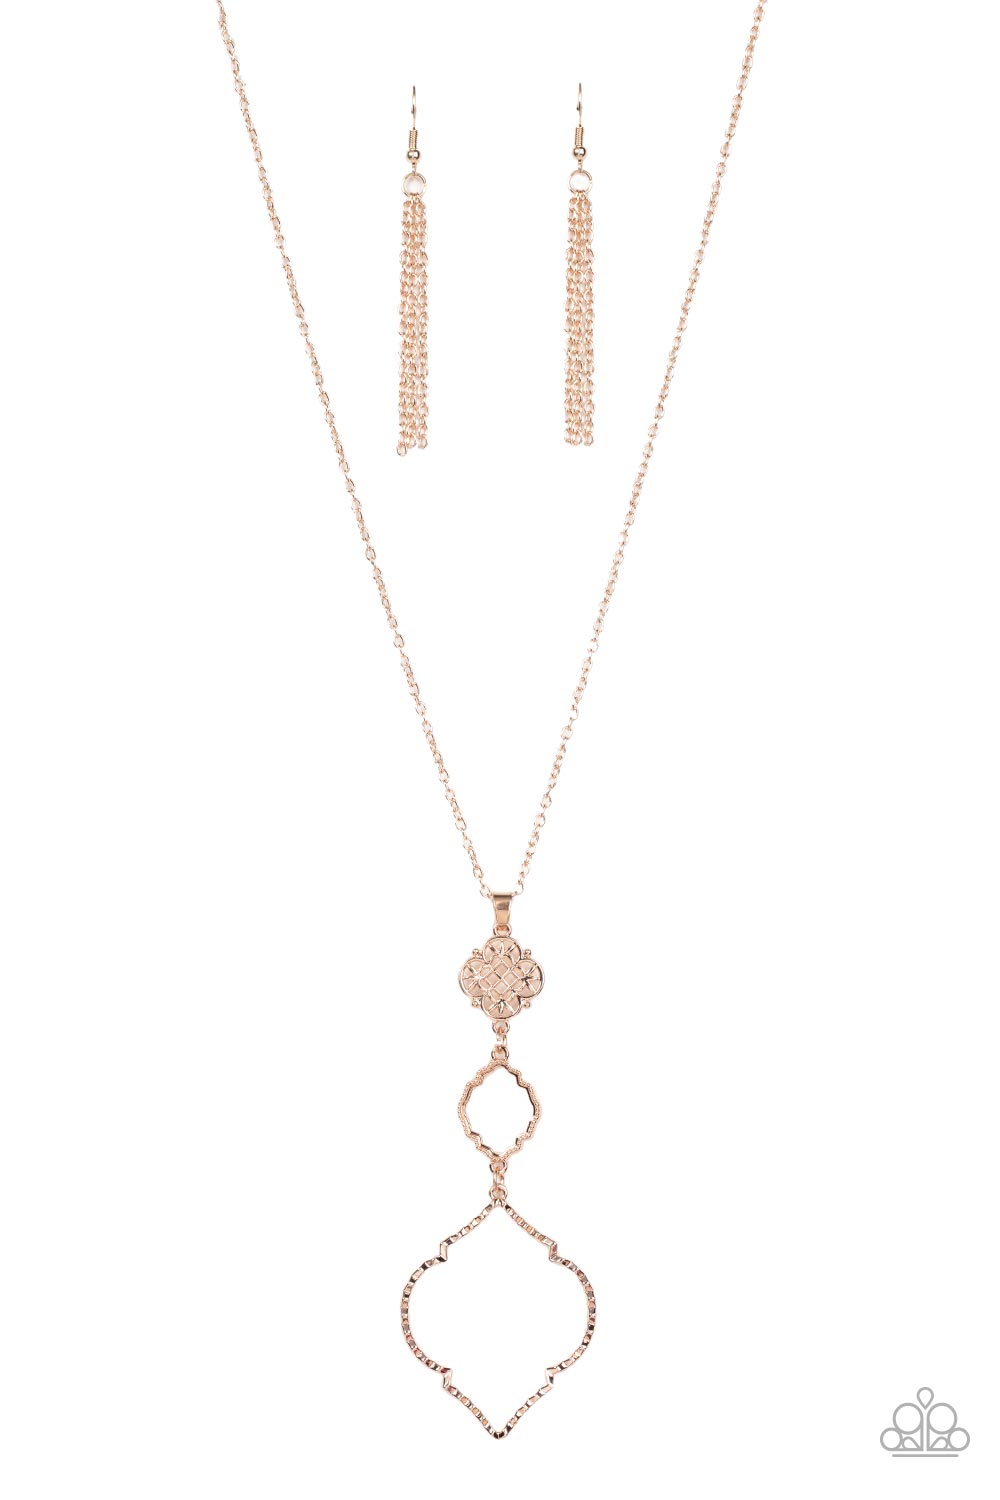 Paparazzi Necklace - Marrakesh Mystery - Rose Gold